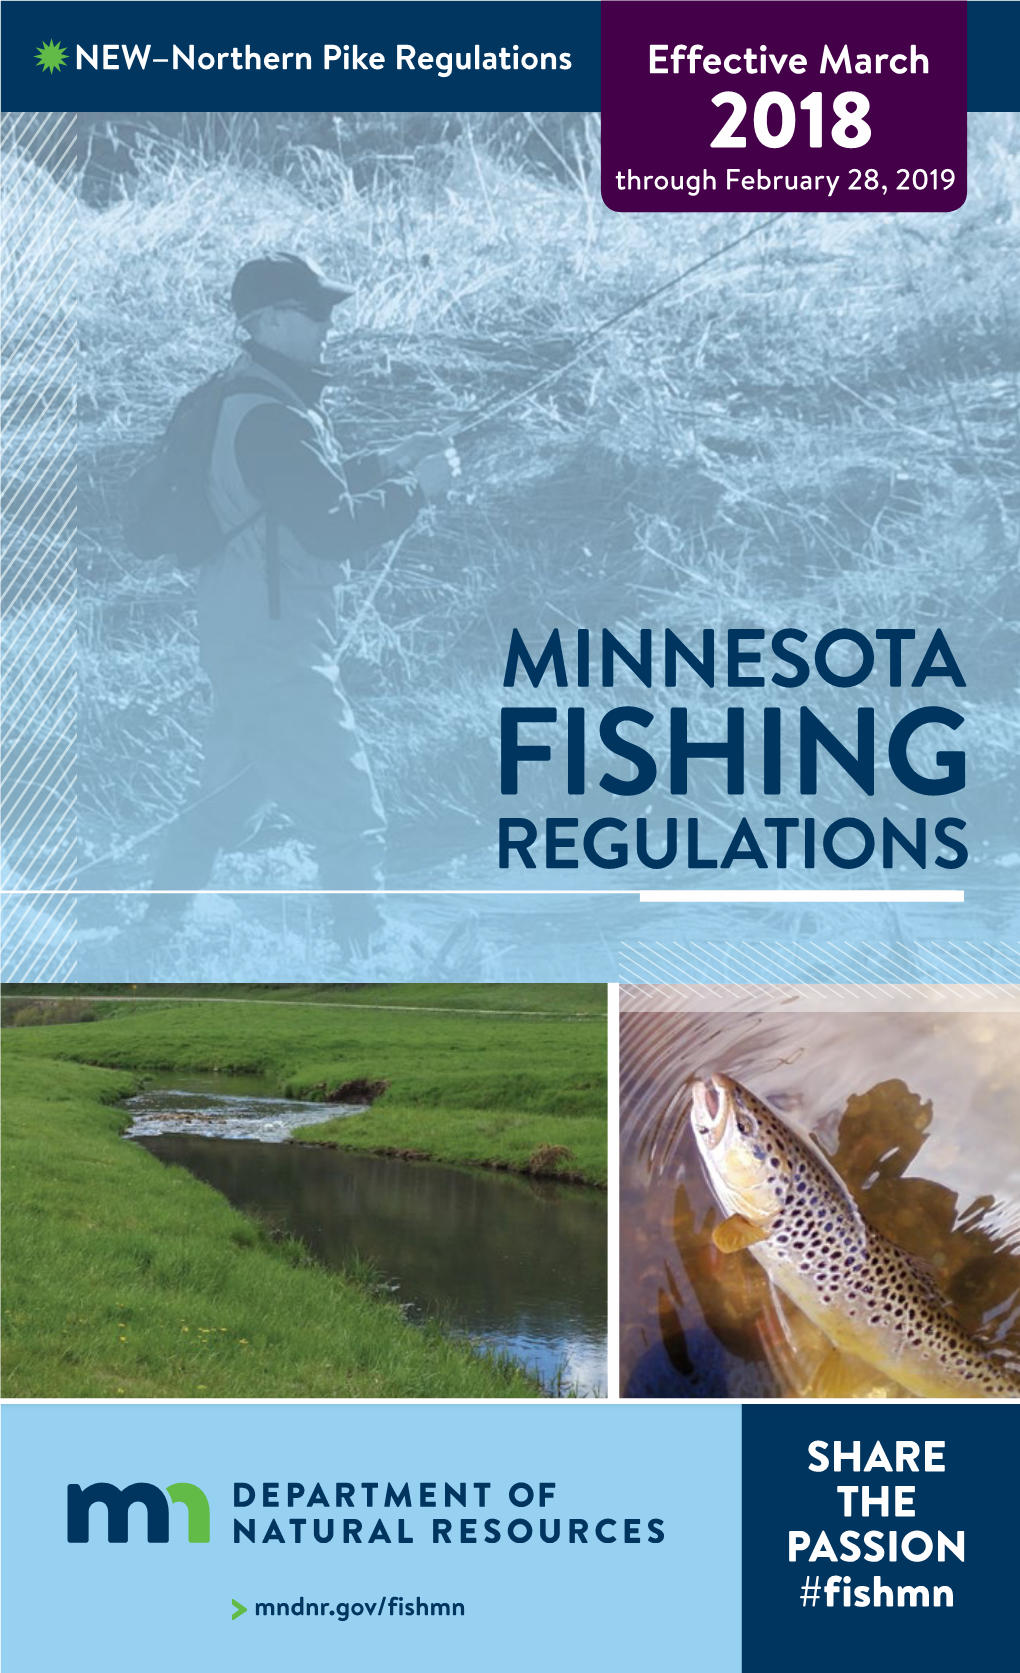 2018 Minnesota Fishing Regulations | 888-MINNDNR START a NEW TRADITION Register As a Donor When You Get Your Minnesota Fishing License Online